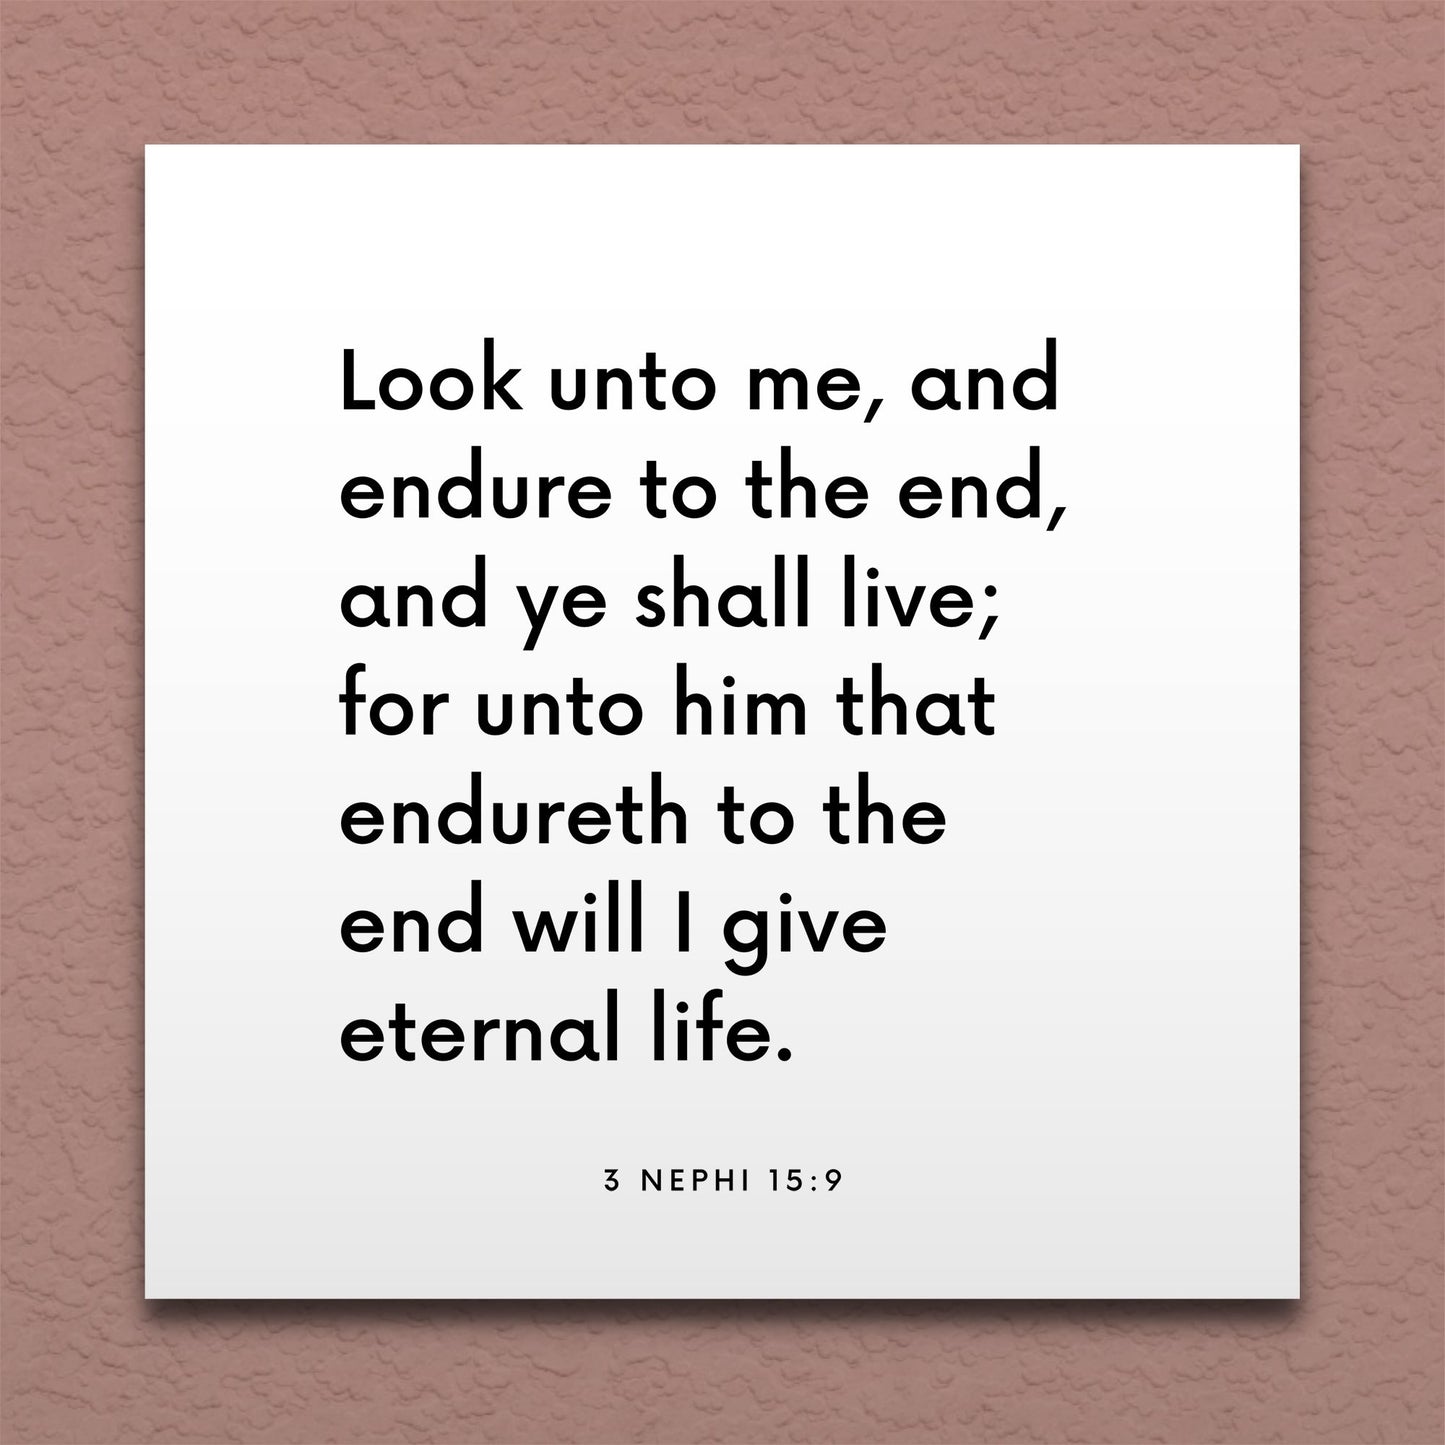 Wall-mounted scripture tile for 3 Nephi 15:9 - "Look unto me, and endure to the end, and ye shall live"